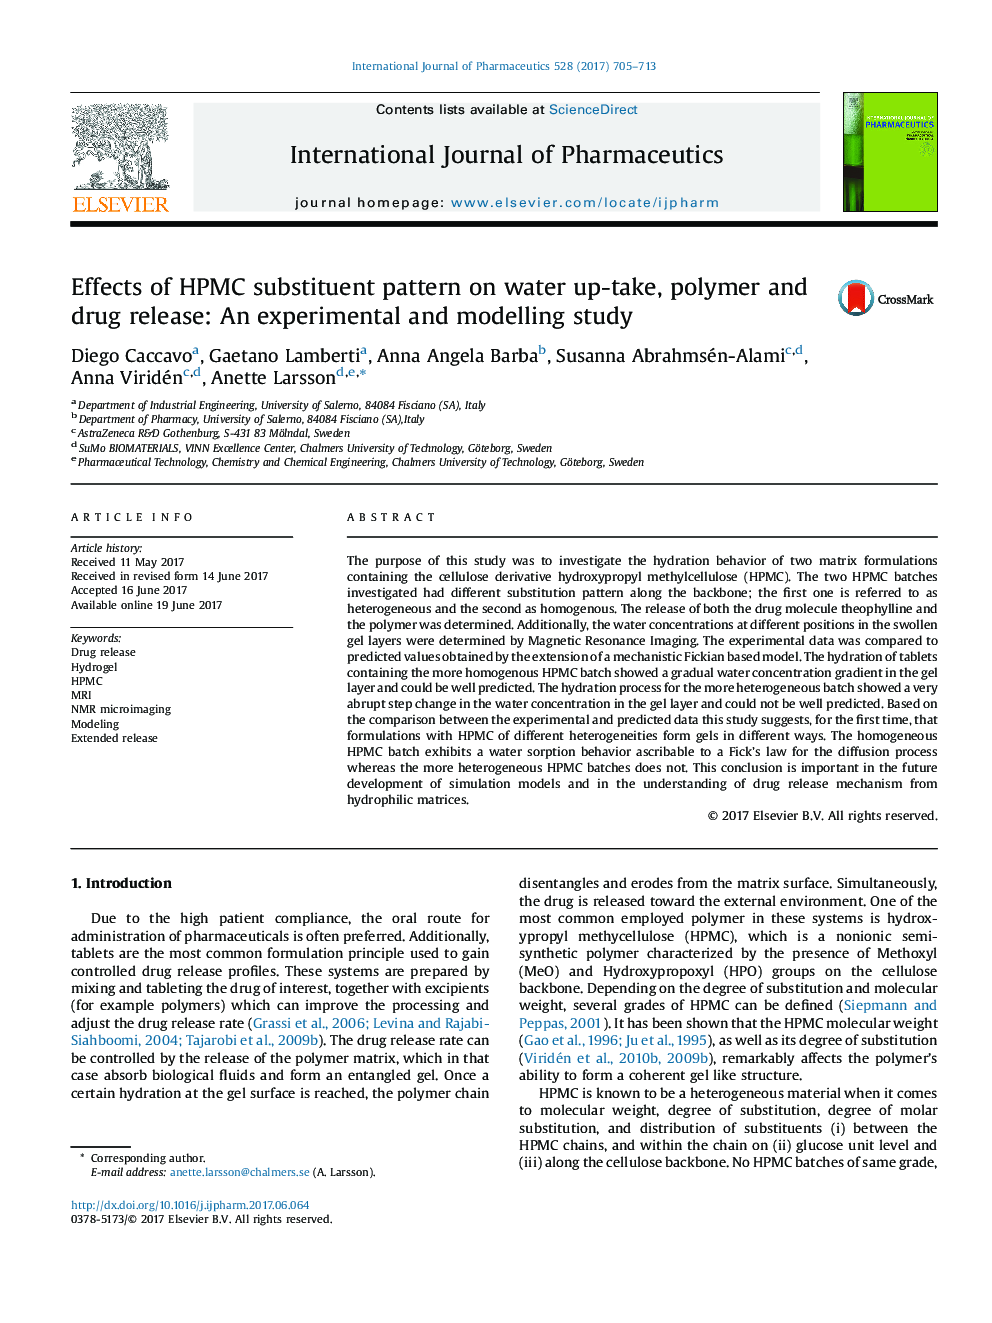 Effects of HPMC substituent pattern on water up-take, polymer and drug release: An experimental and modelling study